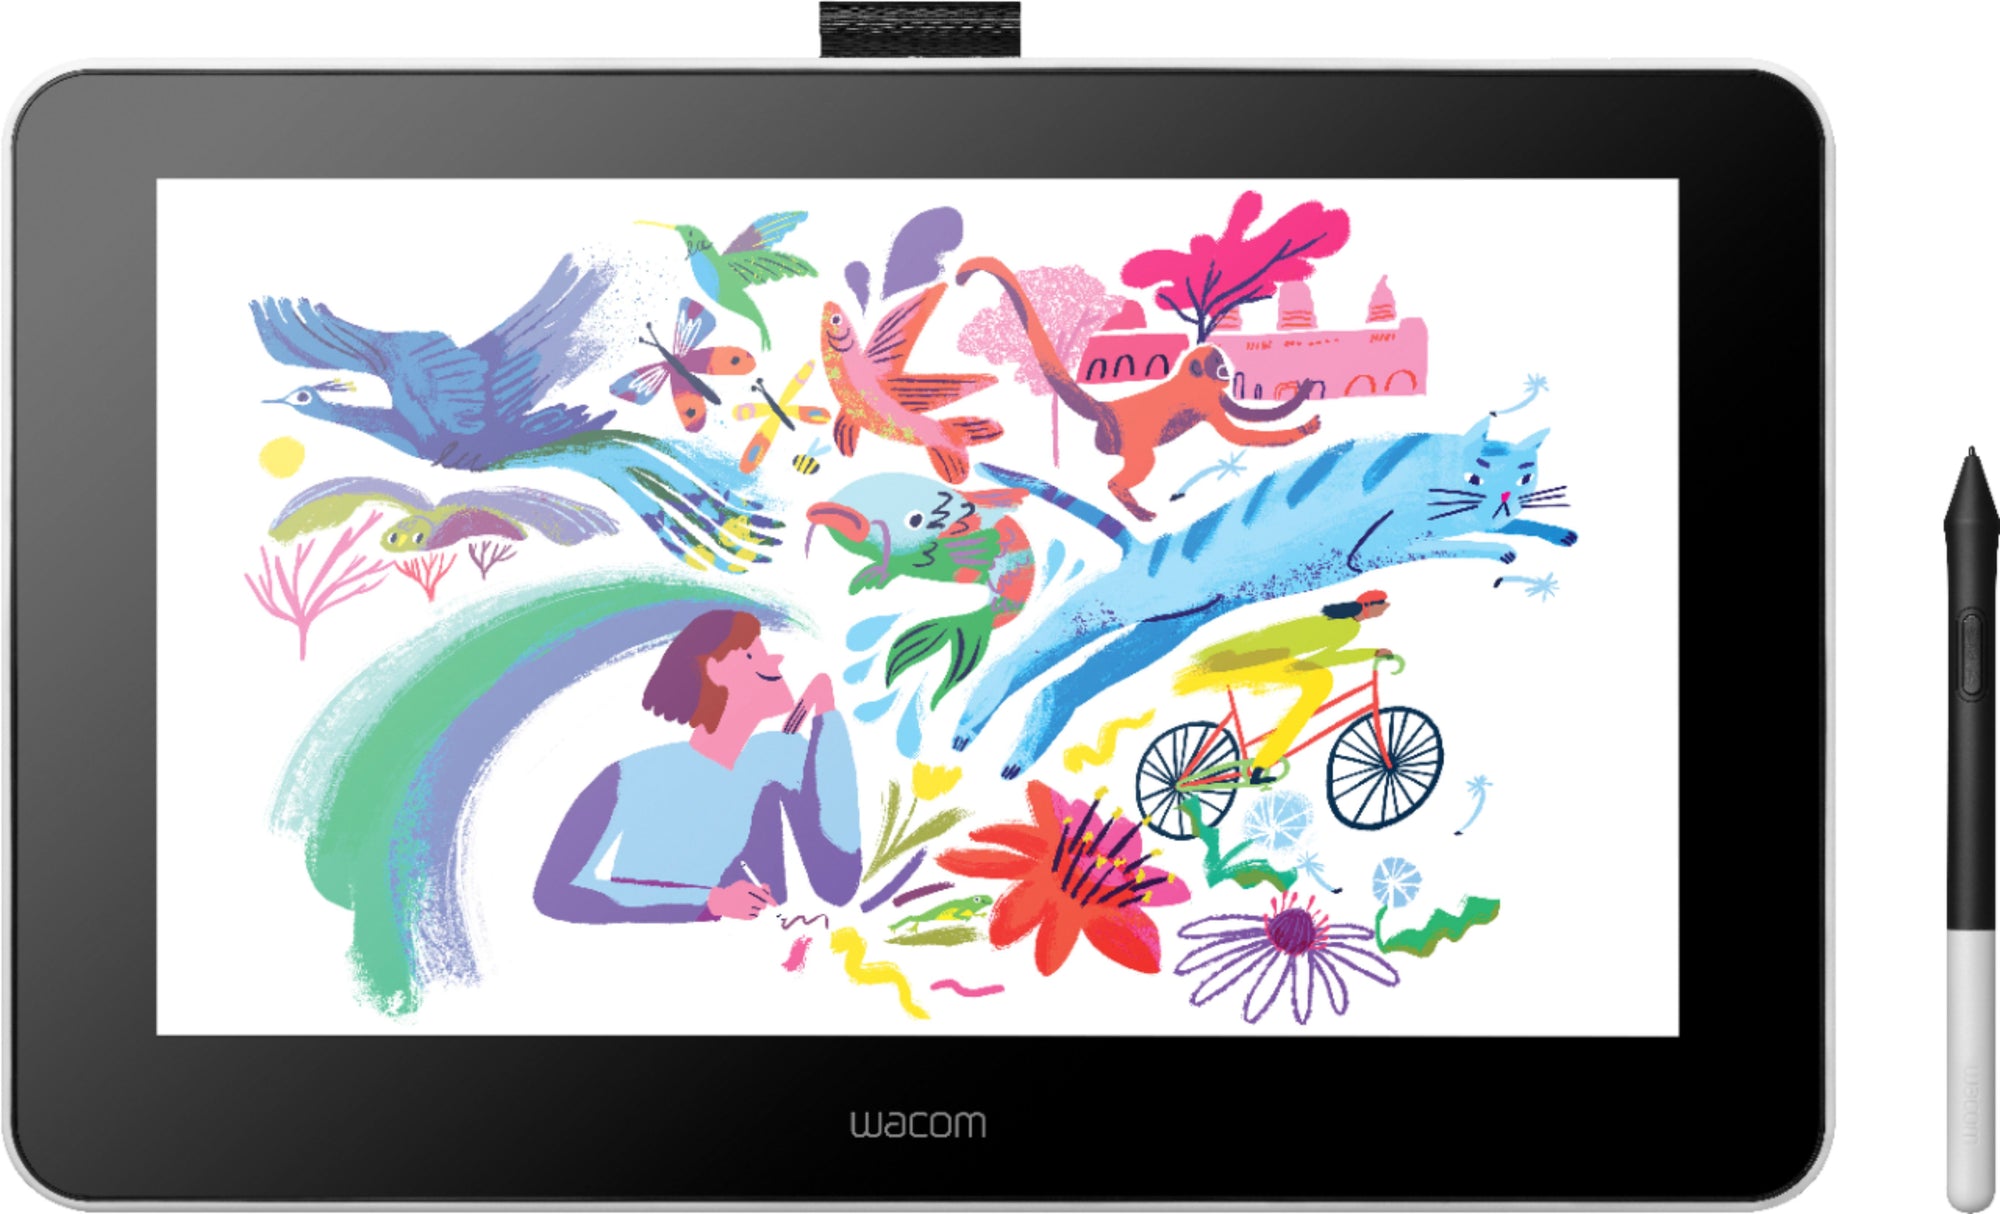 Wacom - DTC133W0A One - Drawing Tablet with Screen, 13.3" Pen Display for Mac, PC, Chromebook & Android (DTC133W0A) - Flint White